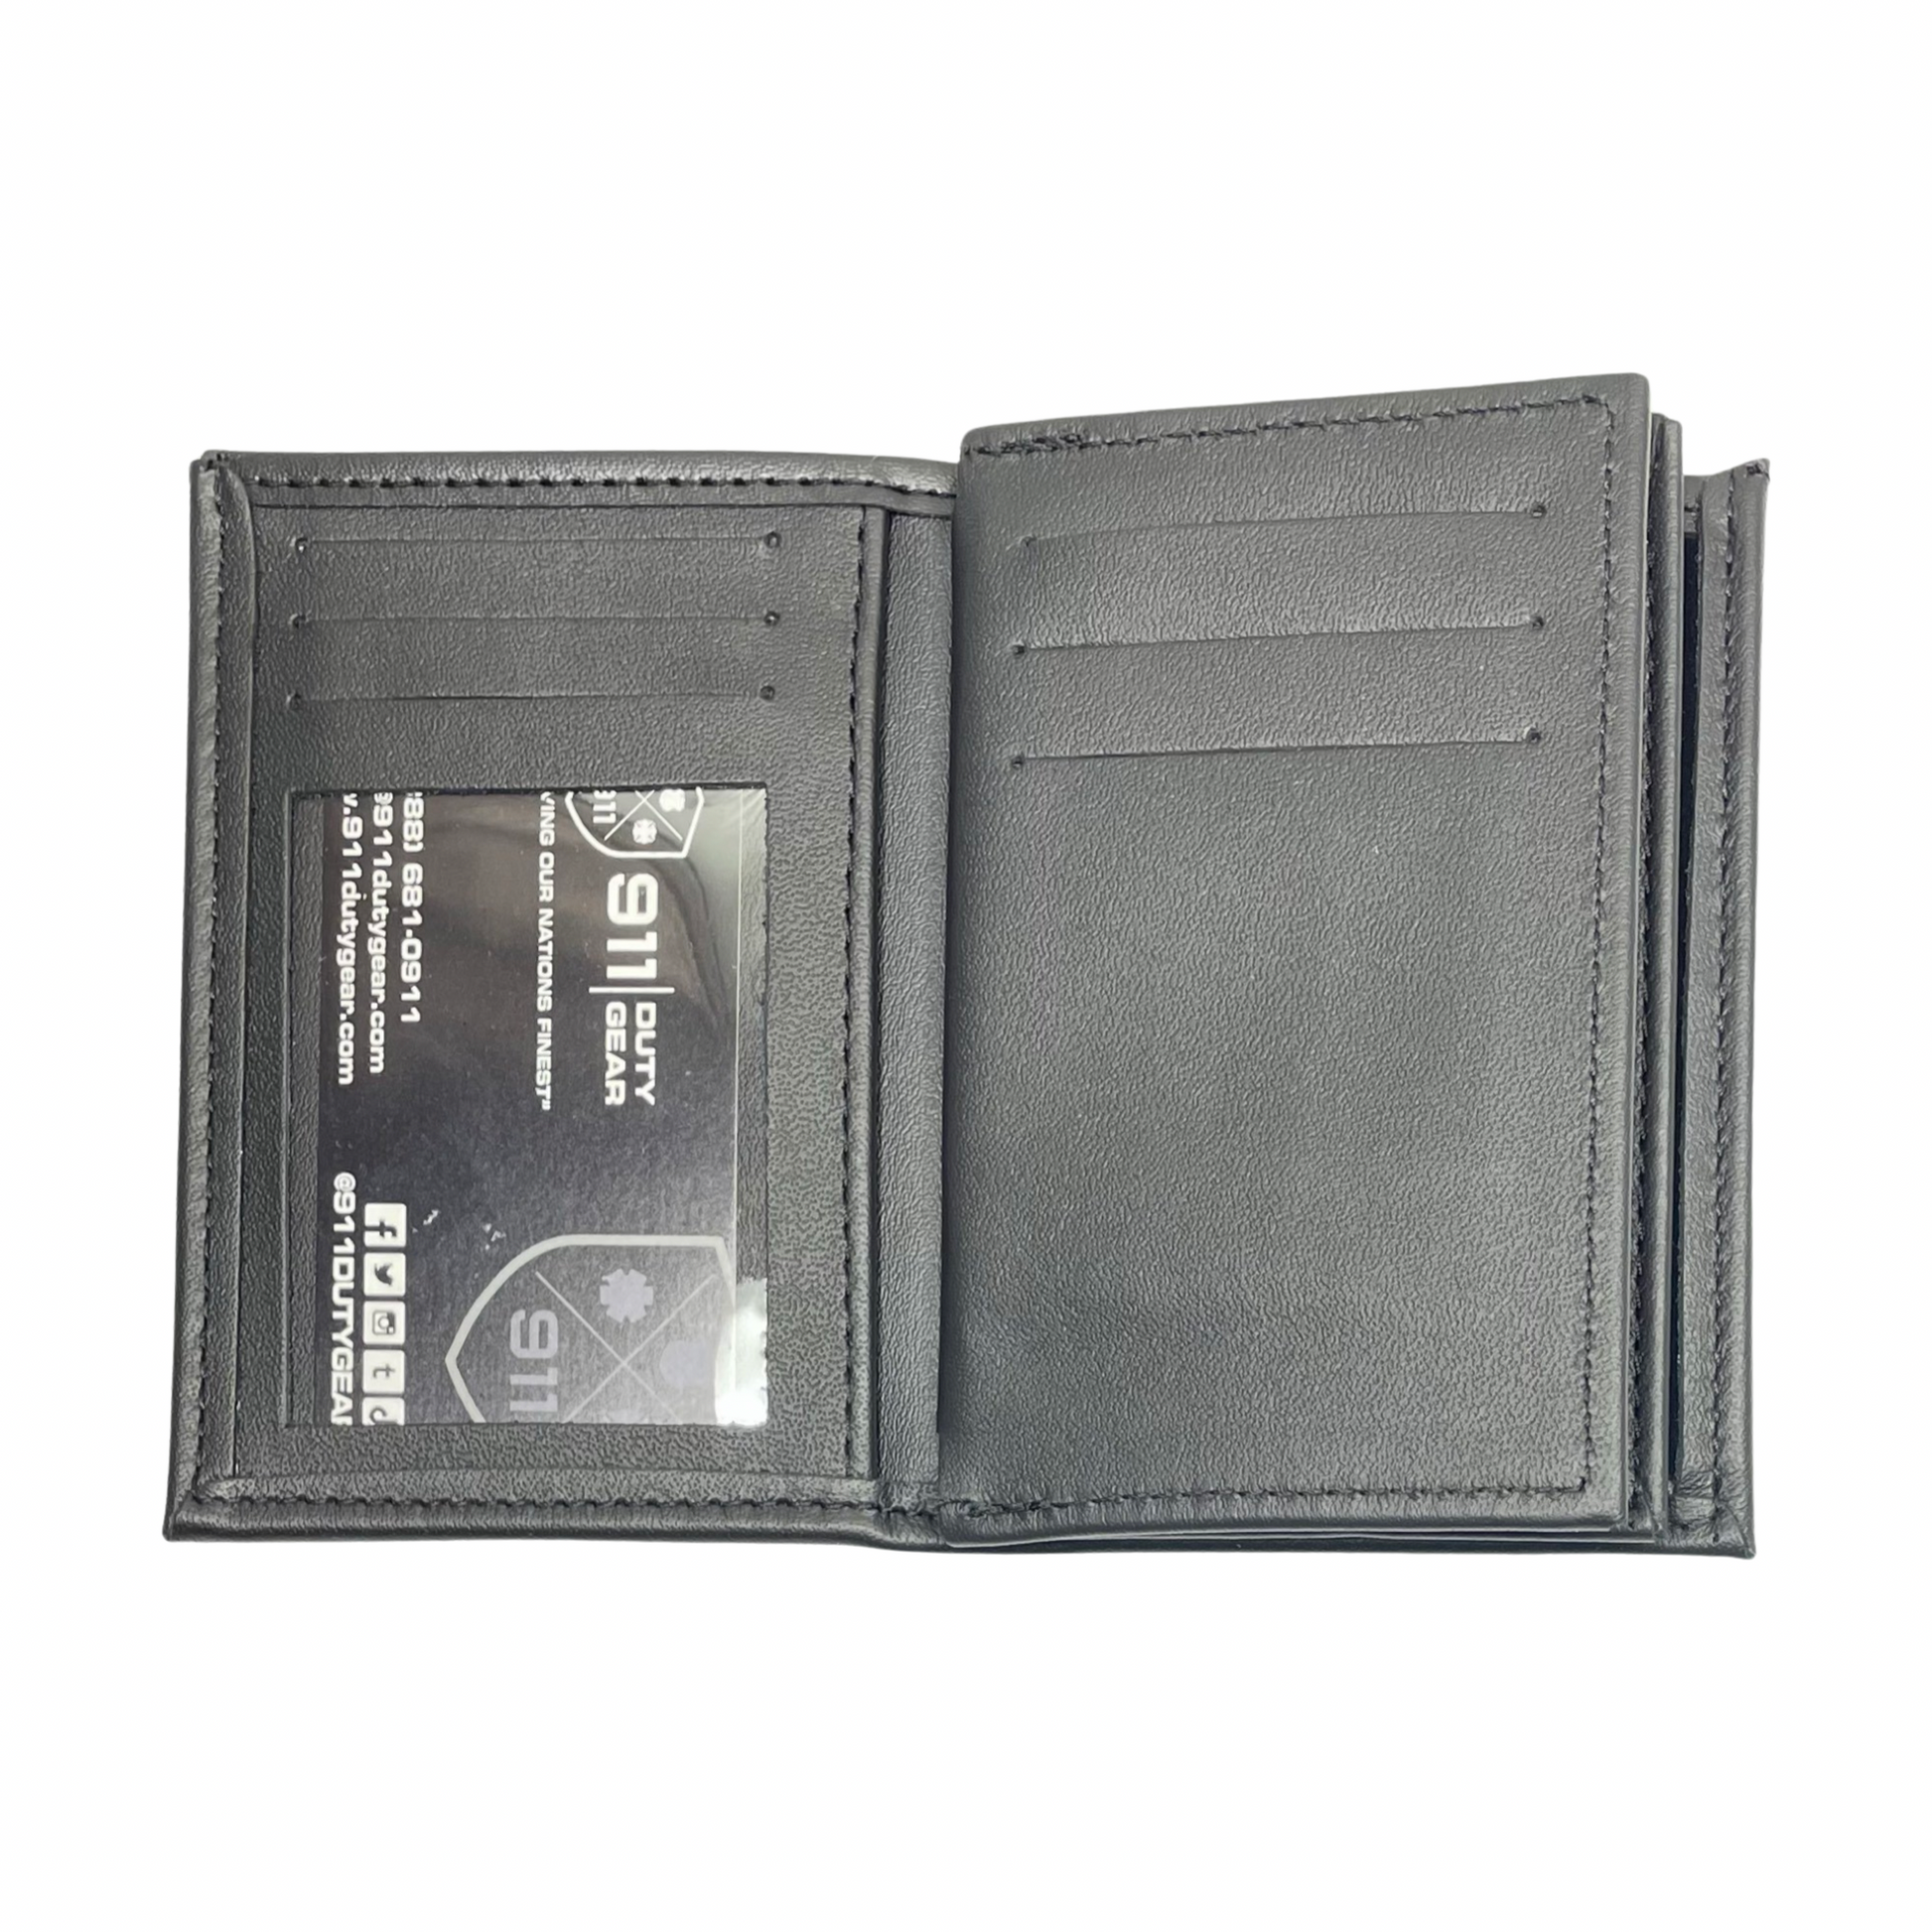 DHS | Department of Homeland Security Horizontal Bifold Double ID Credential & Hidden (3in) Badge Wallet-Perfect Fit-911 Duty Gear USA